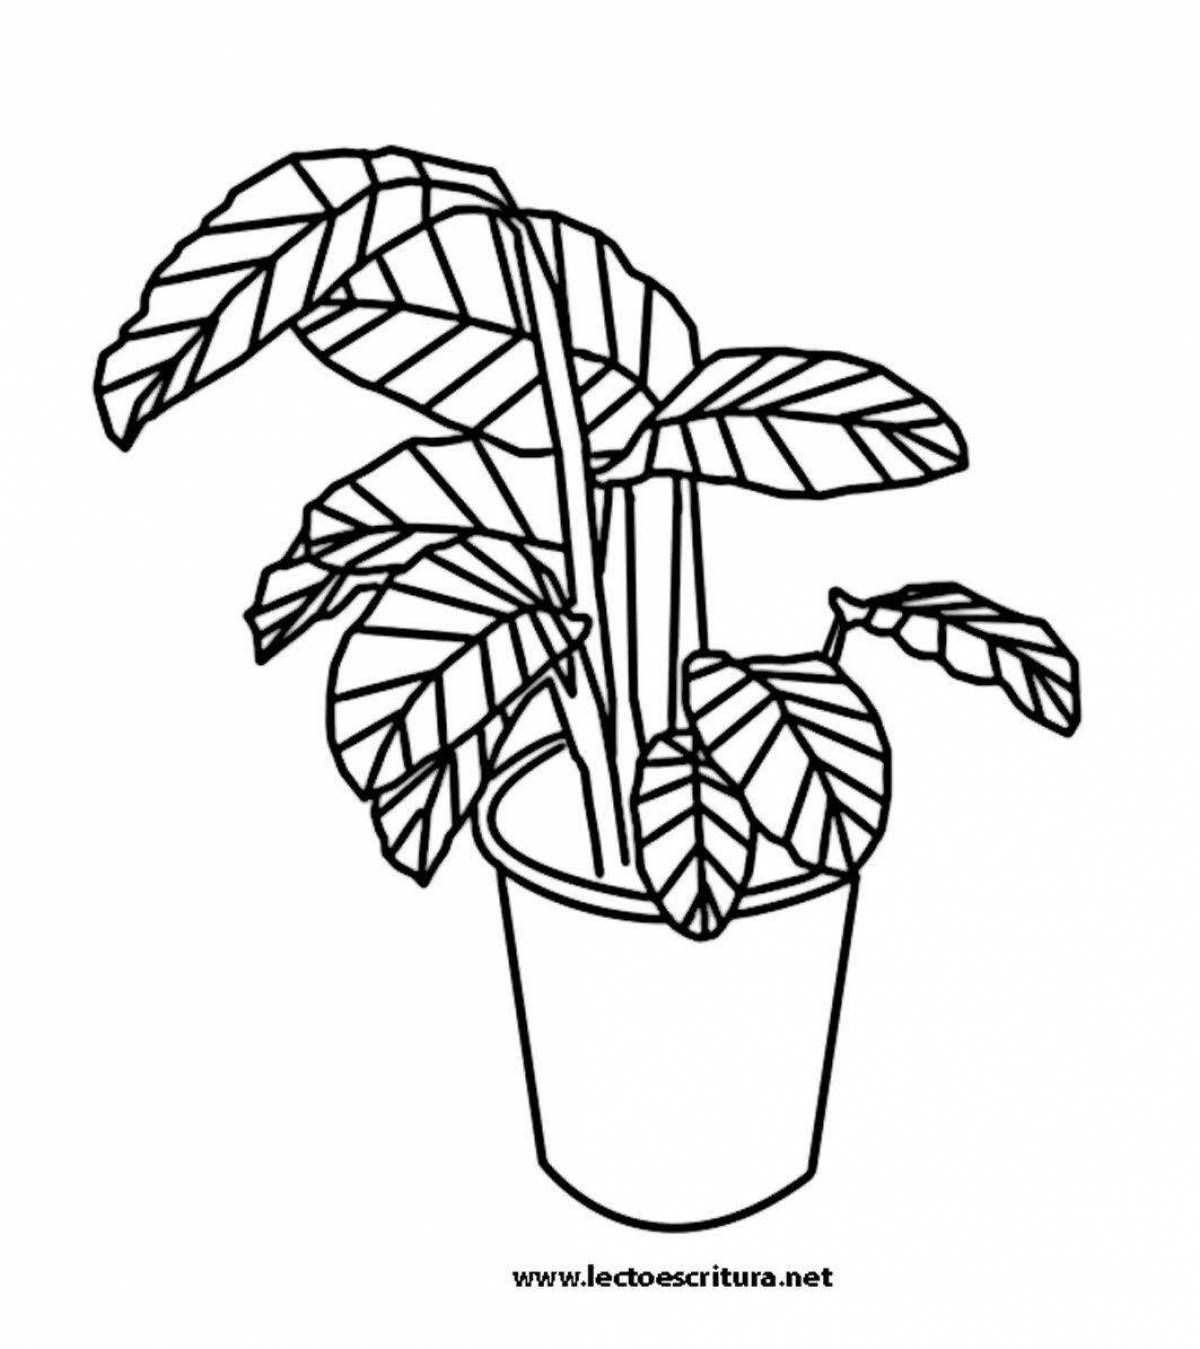 Colouring bright indoor plants for children